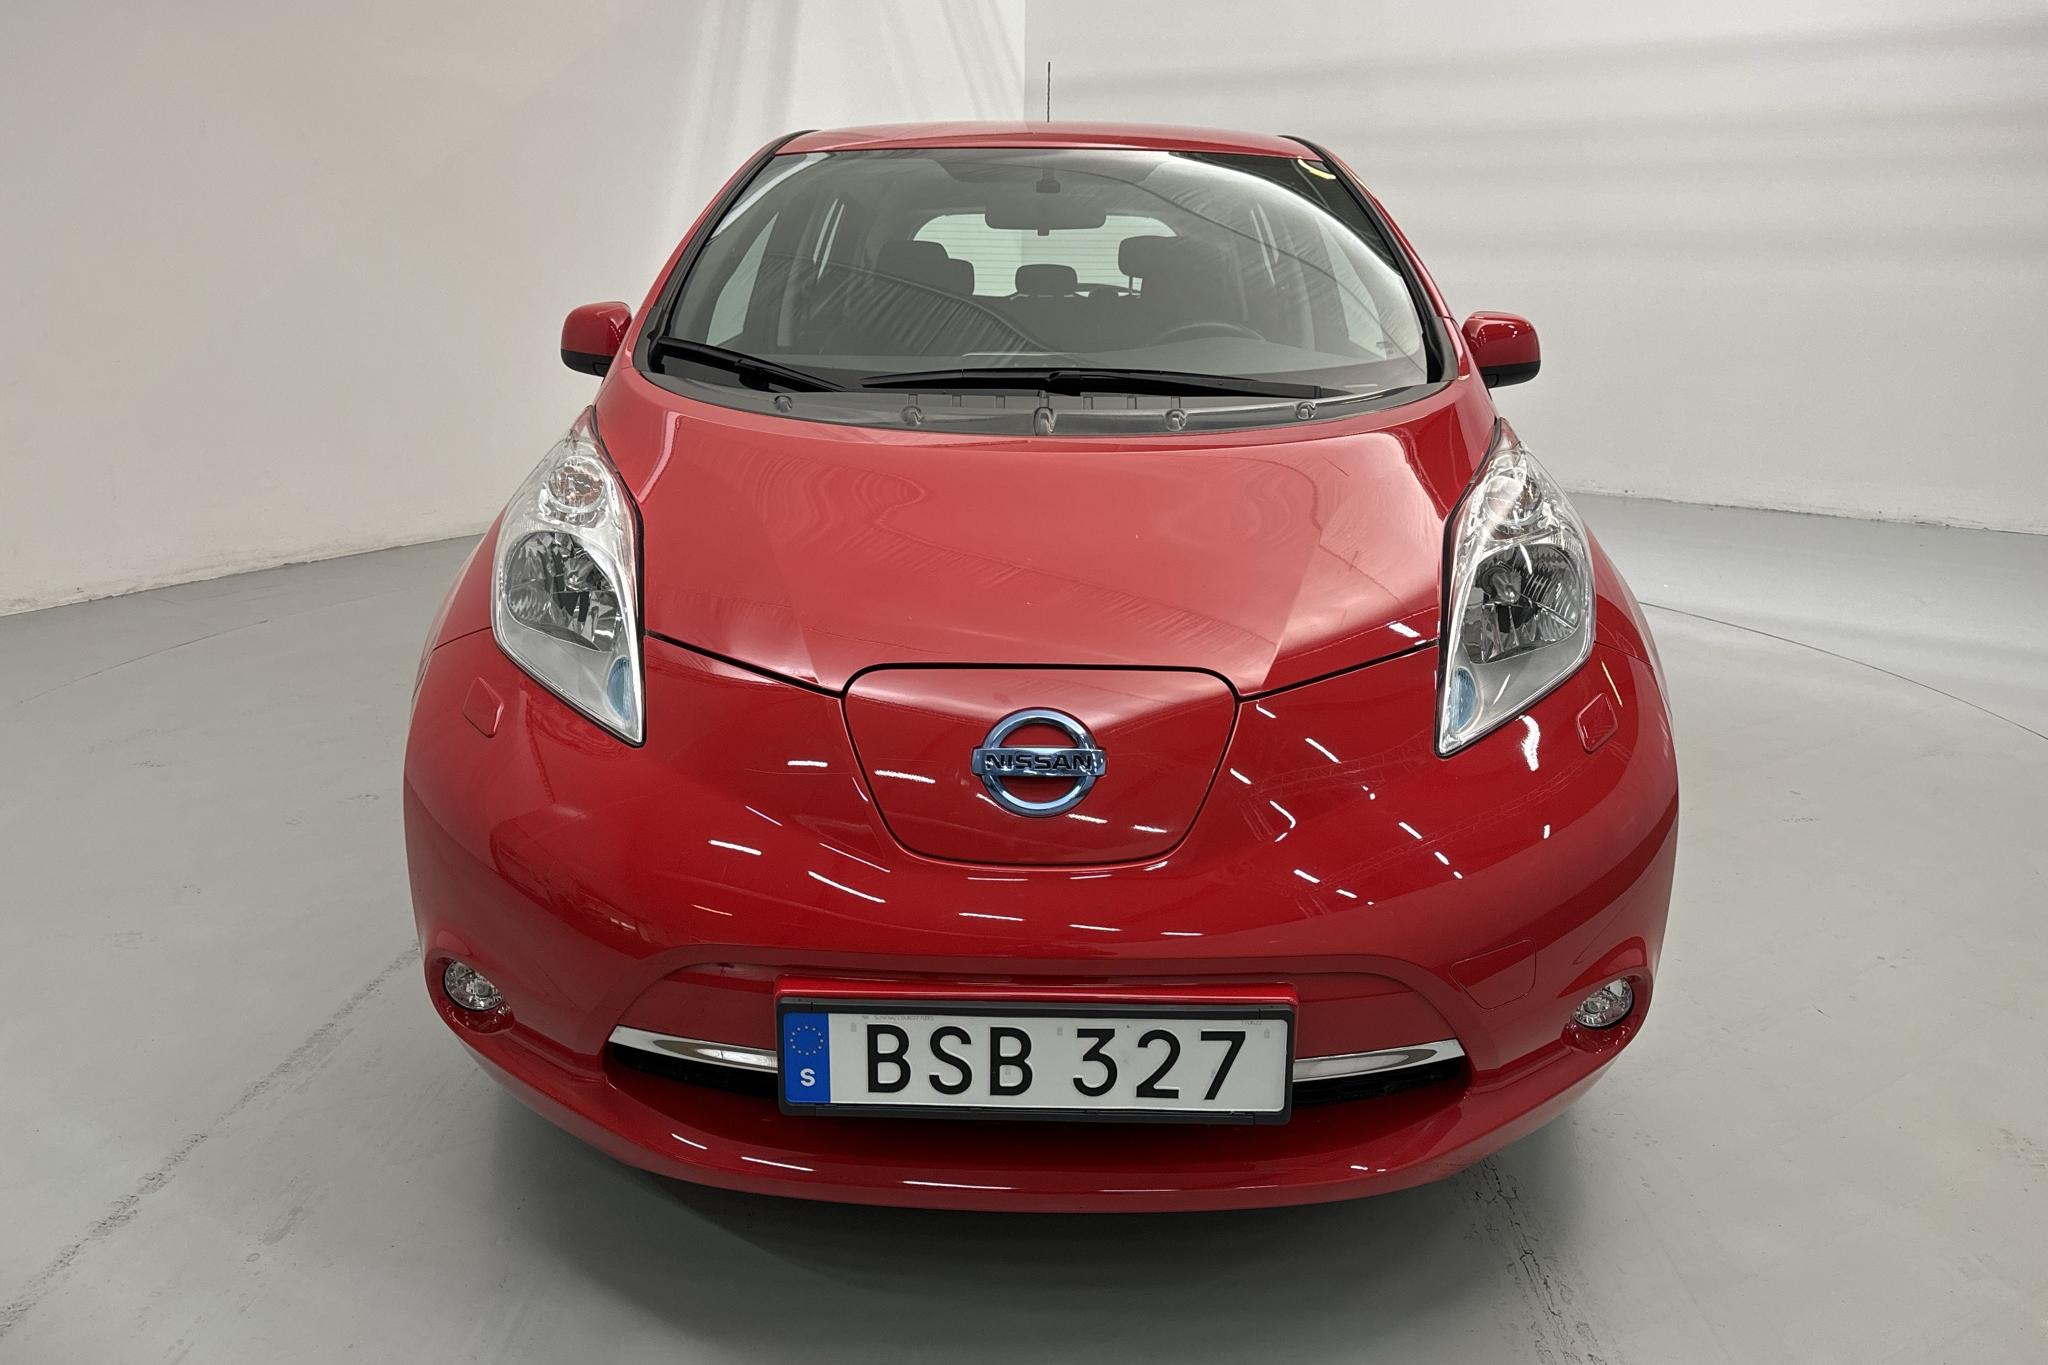 Nissan LEAF 5dr (109hk) - 13 560 km - Automatic - red - 2017